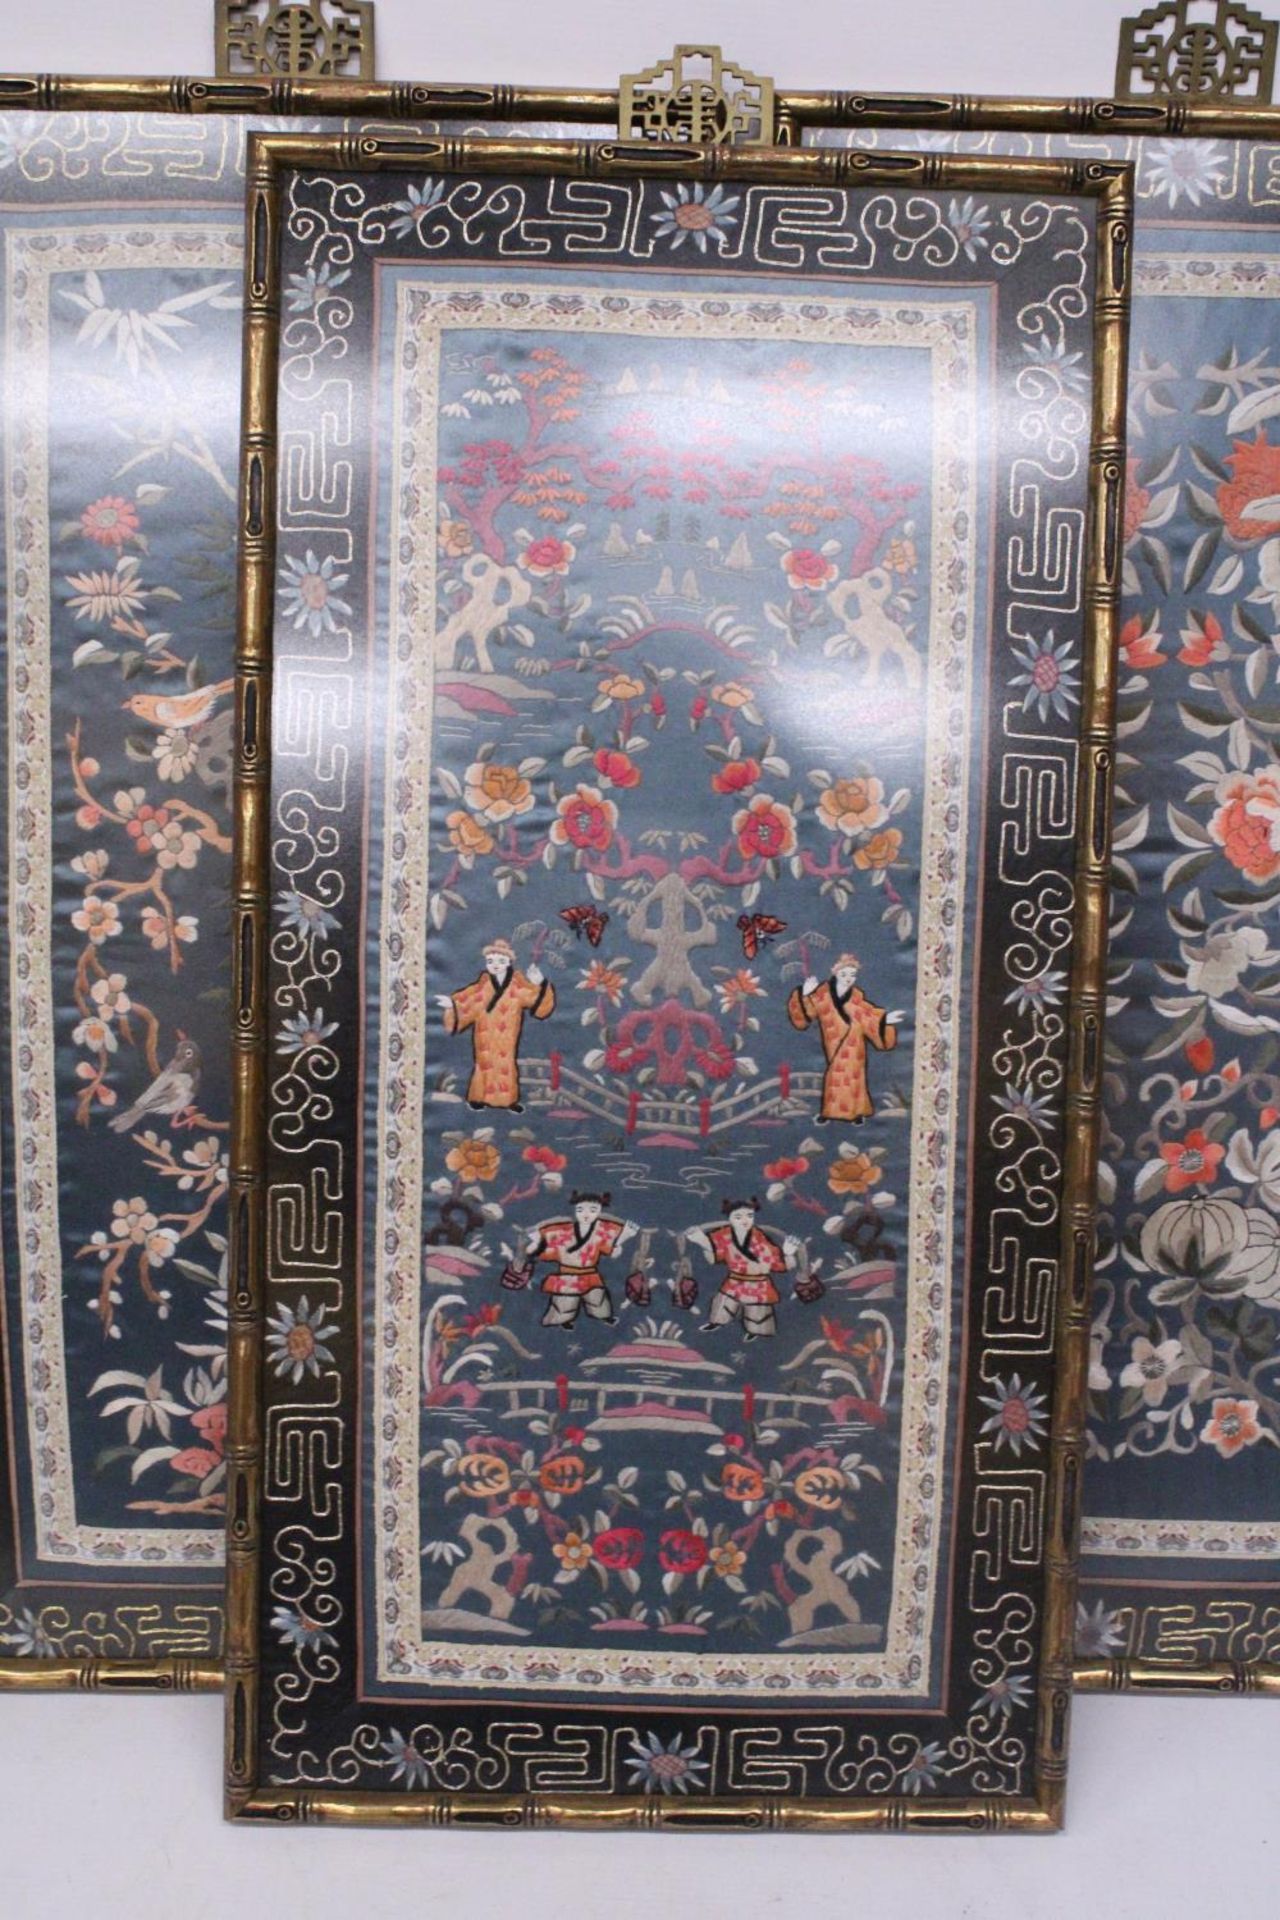 THREE CHINESE SILK EMBROIDERIES DEPICTING A LANDSCAPE SCENE, BIRDS AND FLORALS IN BAMBOO FRAMES - Image 2 of 7